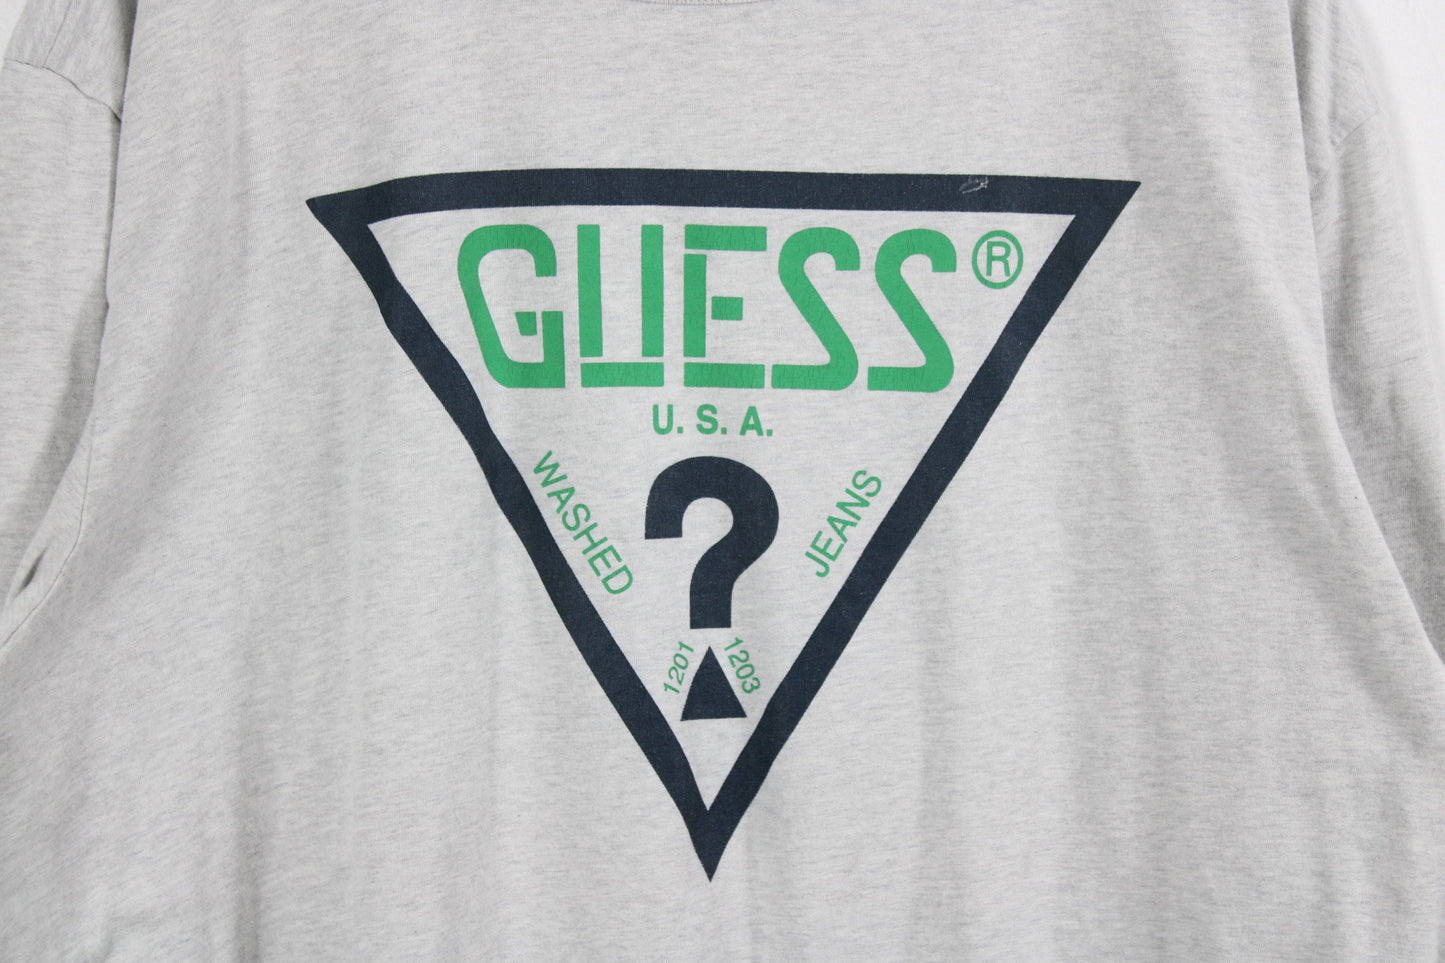 GuessT-Shirt / Vintage American Sports Graphic Promo Tee 90s / 1990s / Y2K / 2000s